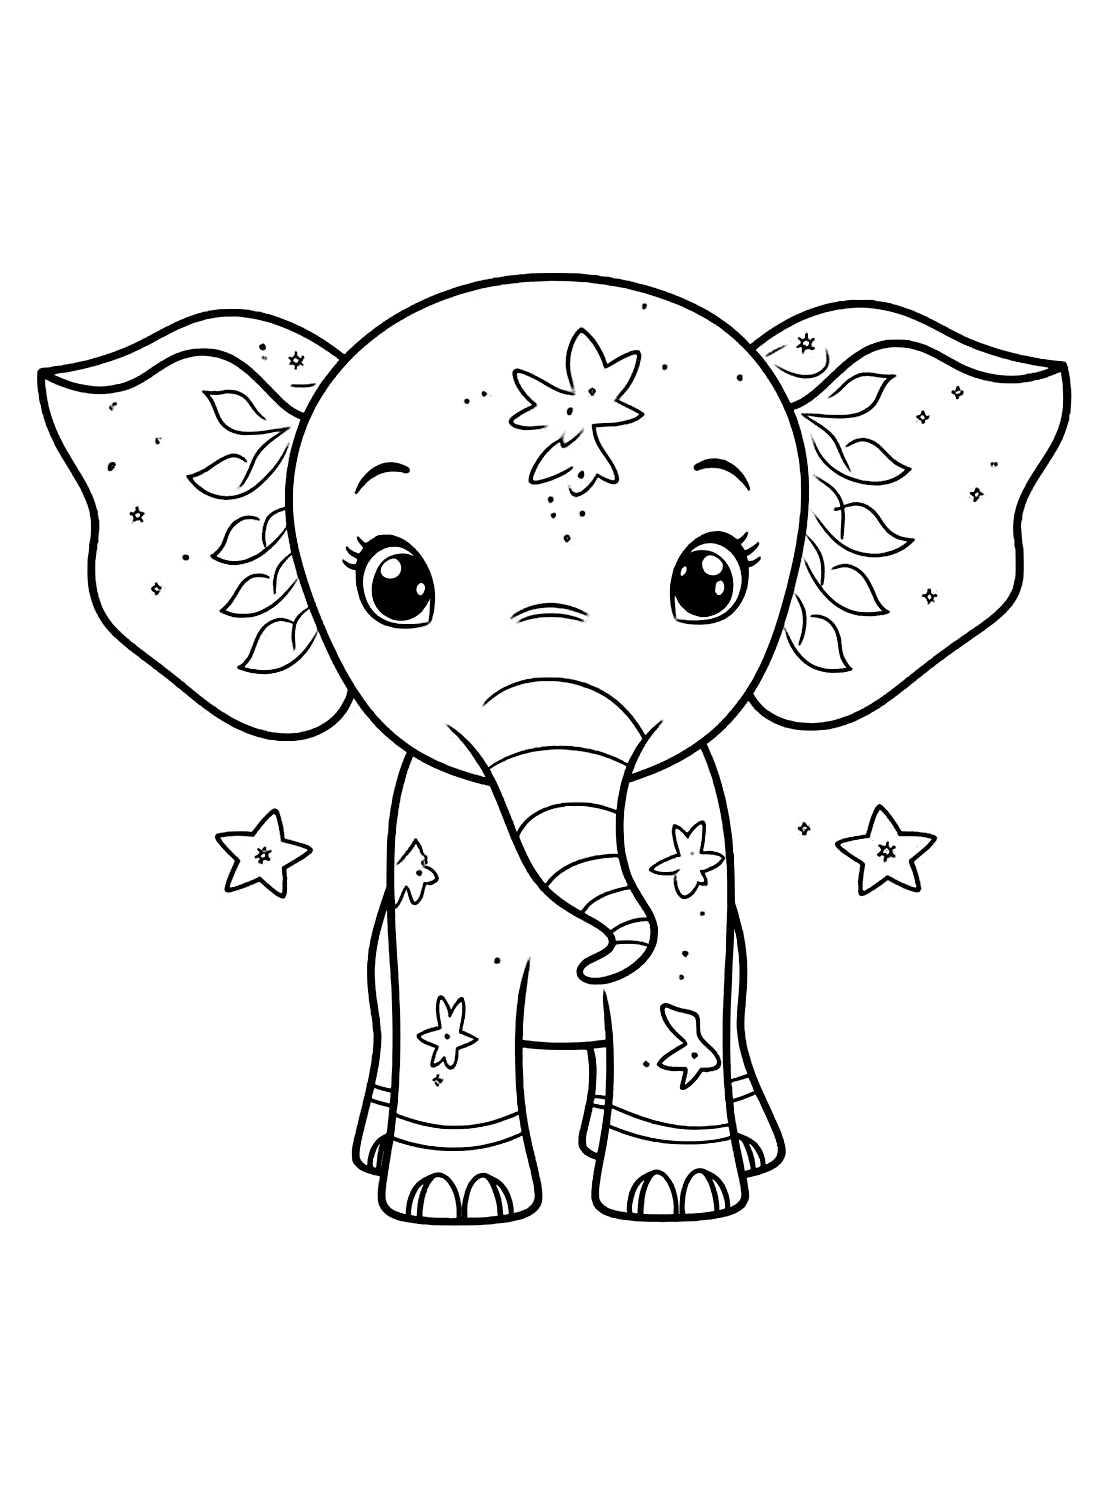 Baby elephant coloring pages from Elephant